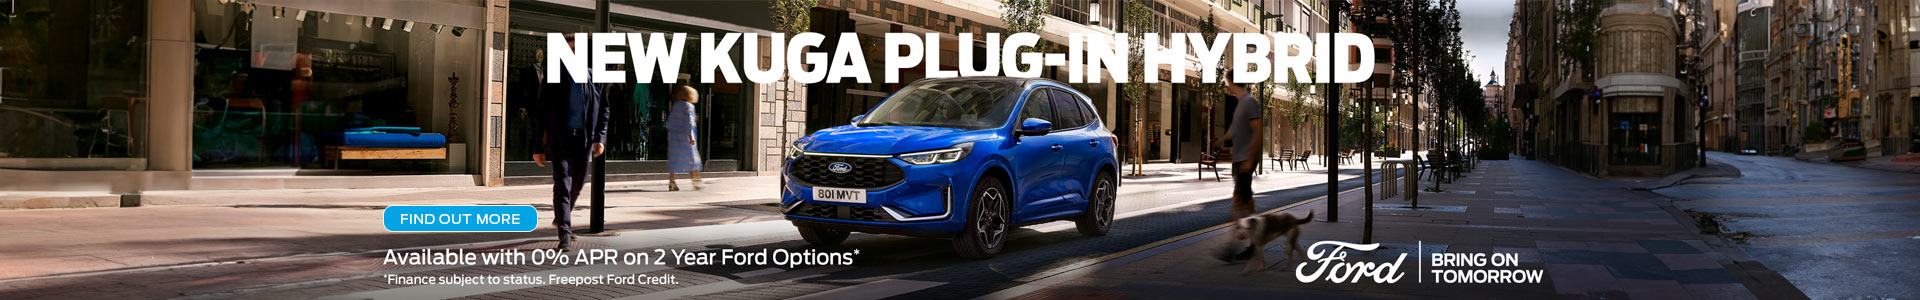 New Ford Kuga - Loaded with More  - Order yours today